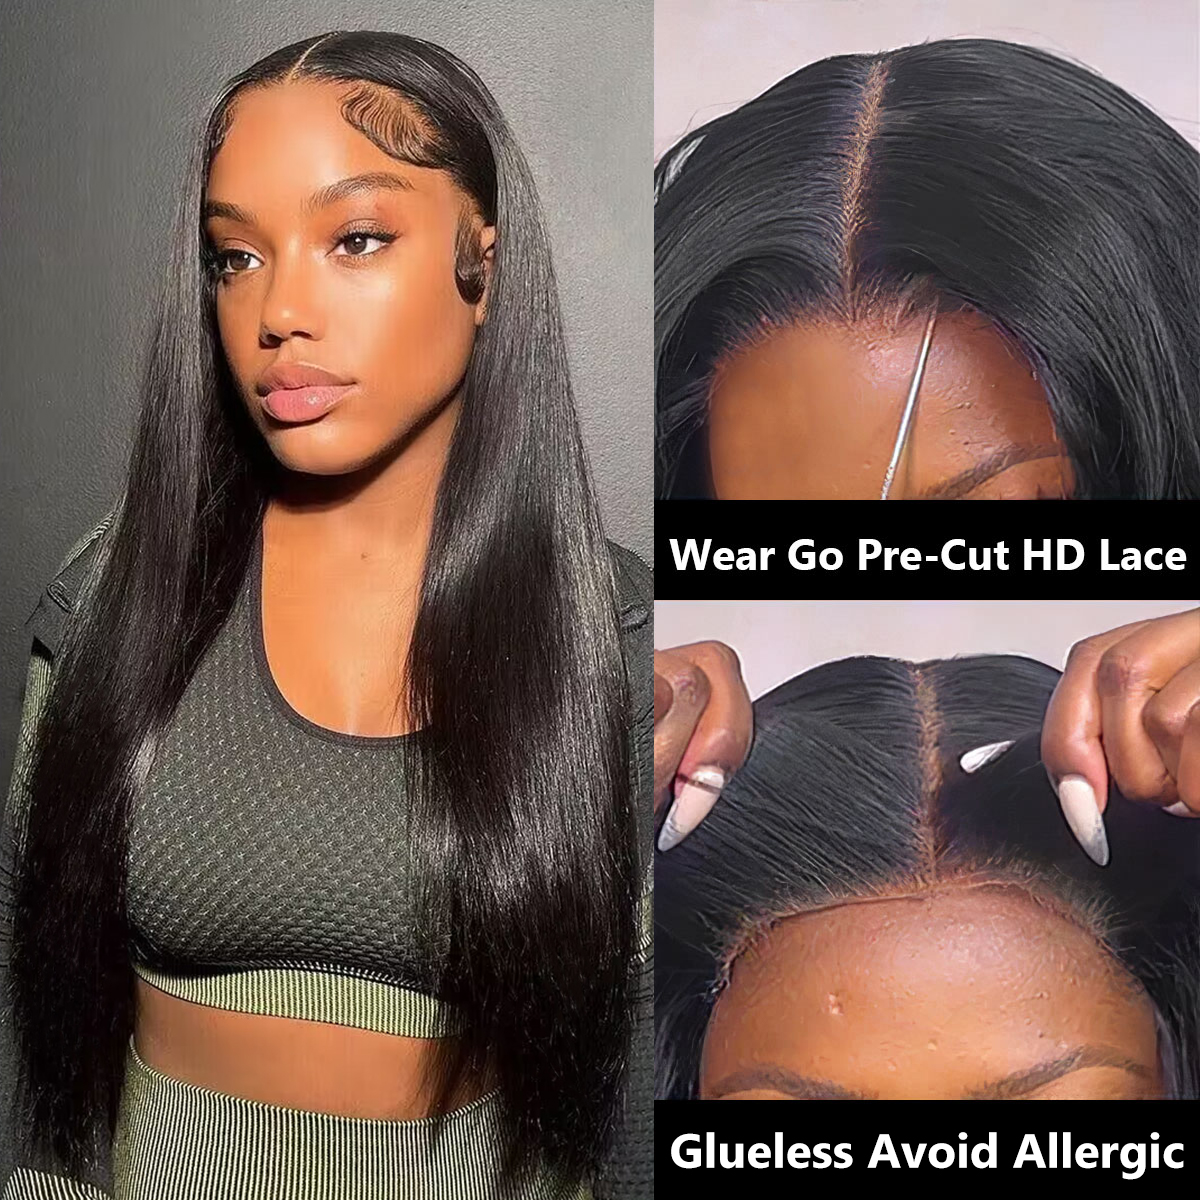 straight wear and go pre cut lace wig